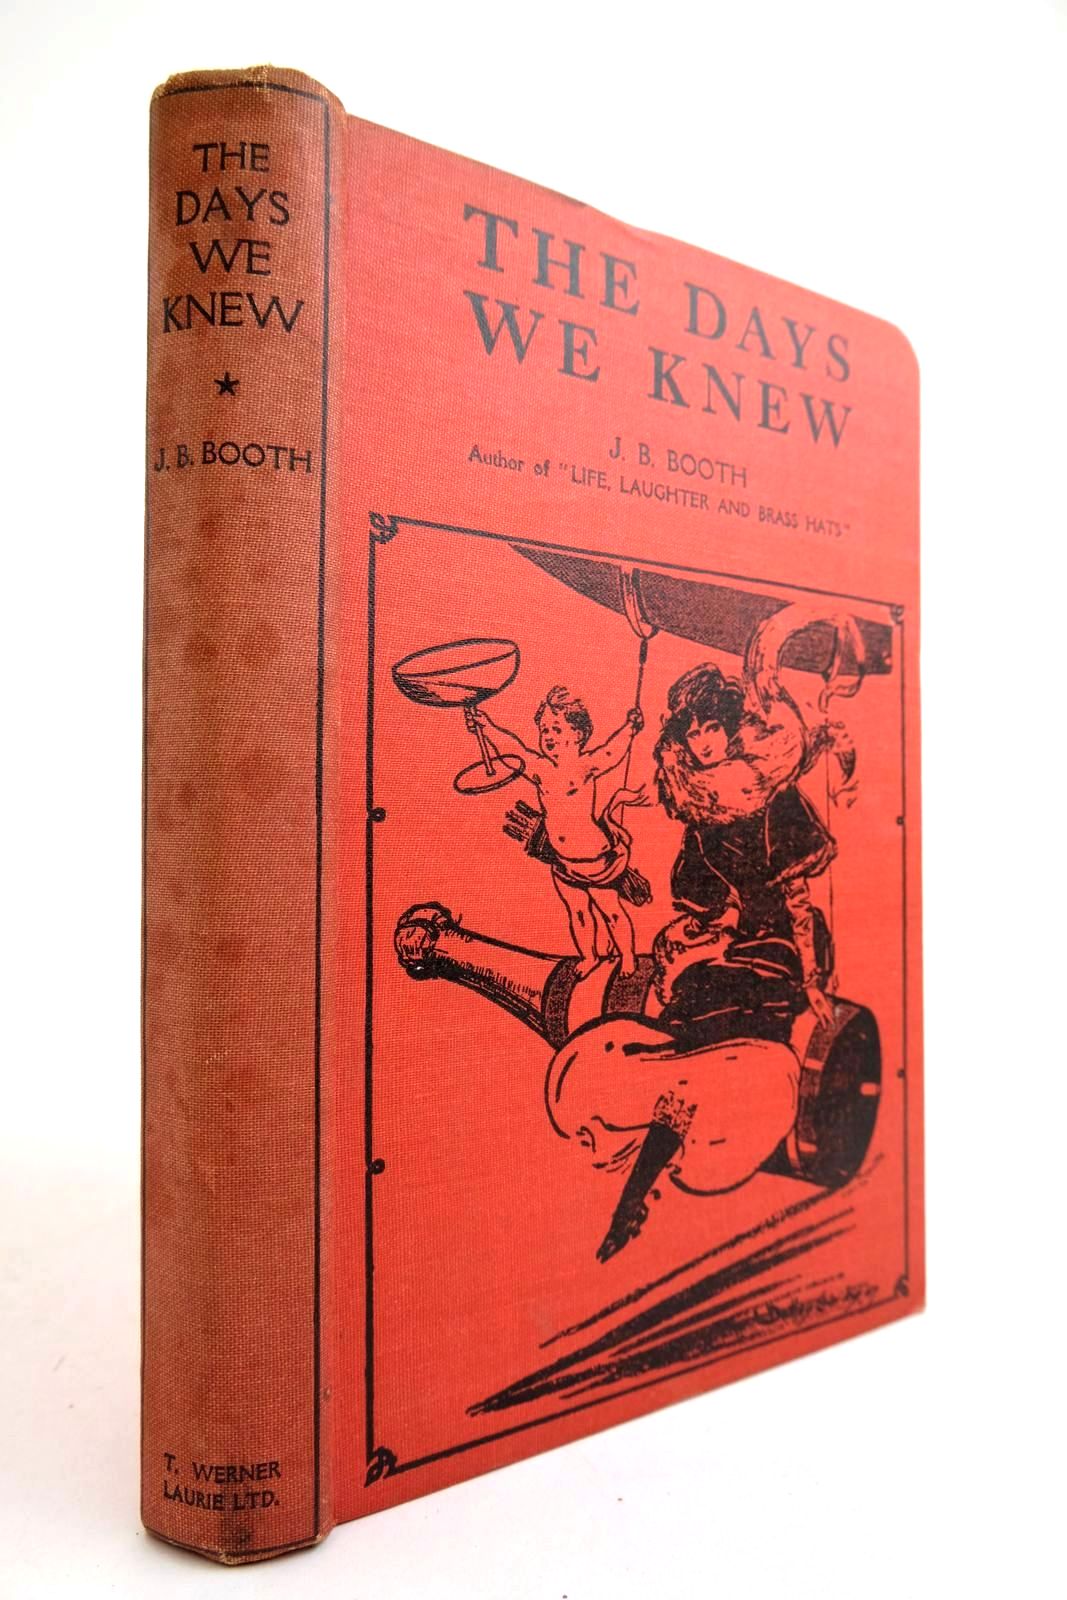 Photo of THE DAYS WE KNEW written by Booth, J.B. published by T. Werner Laurie Ltd. (STOCK CODE: 2134332)  for sale by Stella & Rose's Books